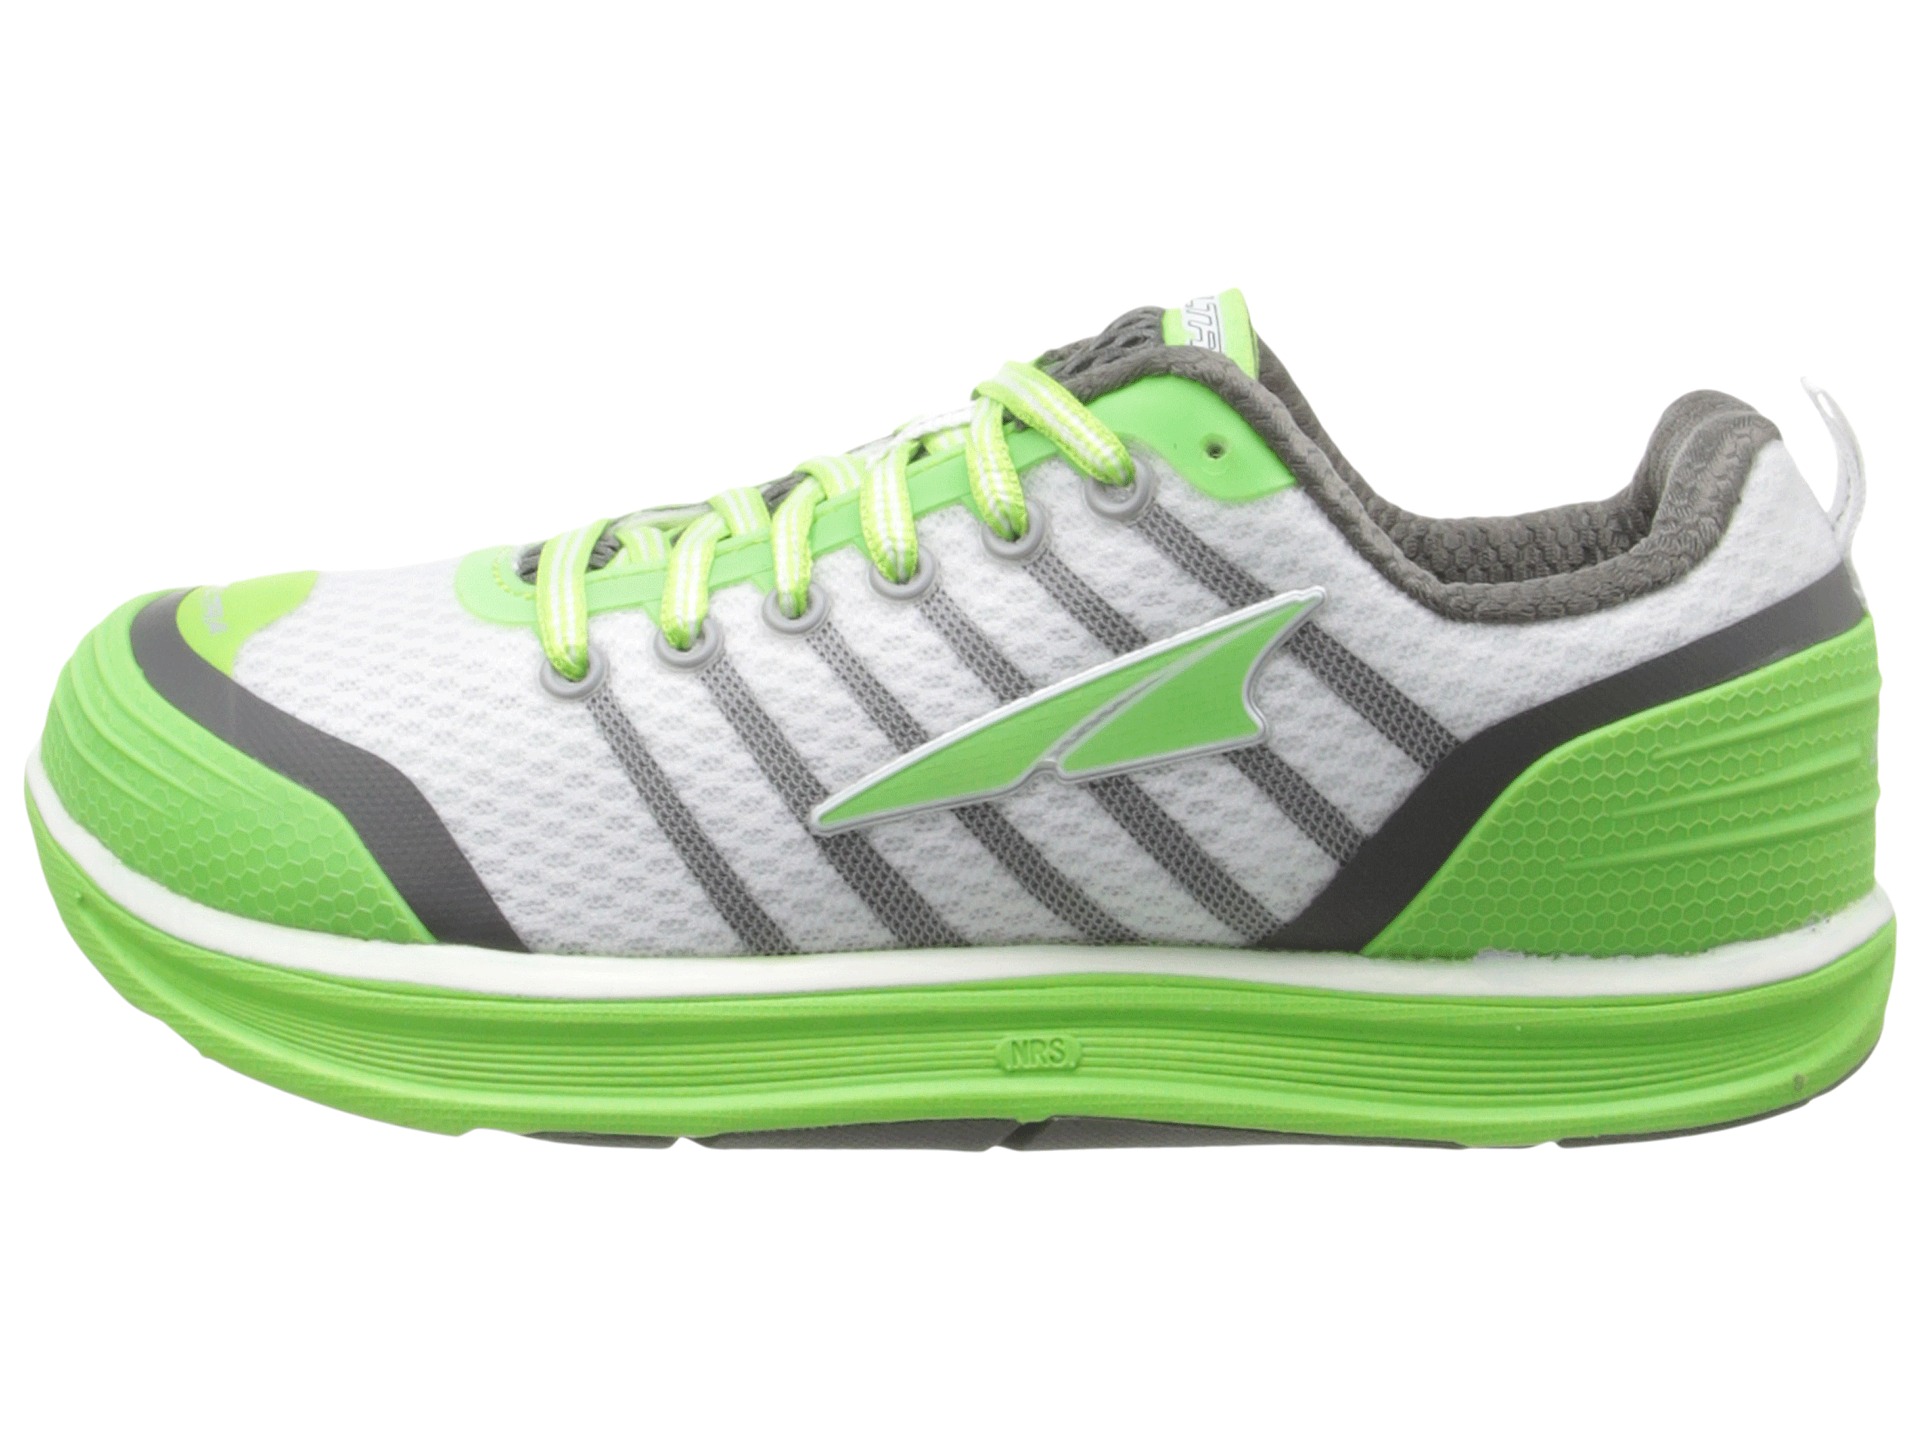 Altra Zero Drop Footwear Intuition 2 | Shipped Free at Zappos